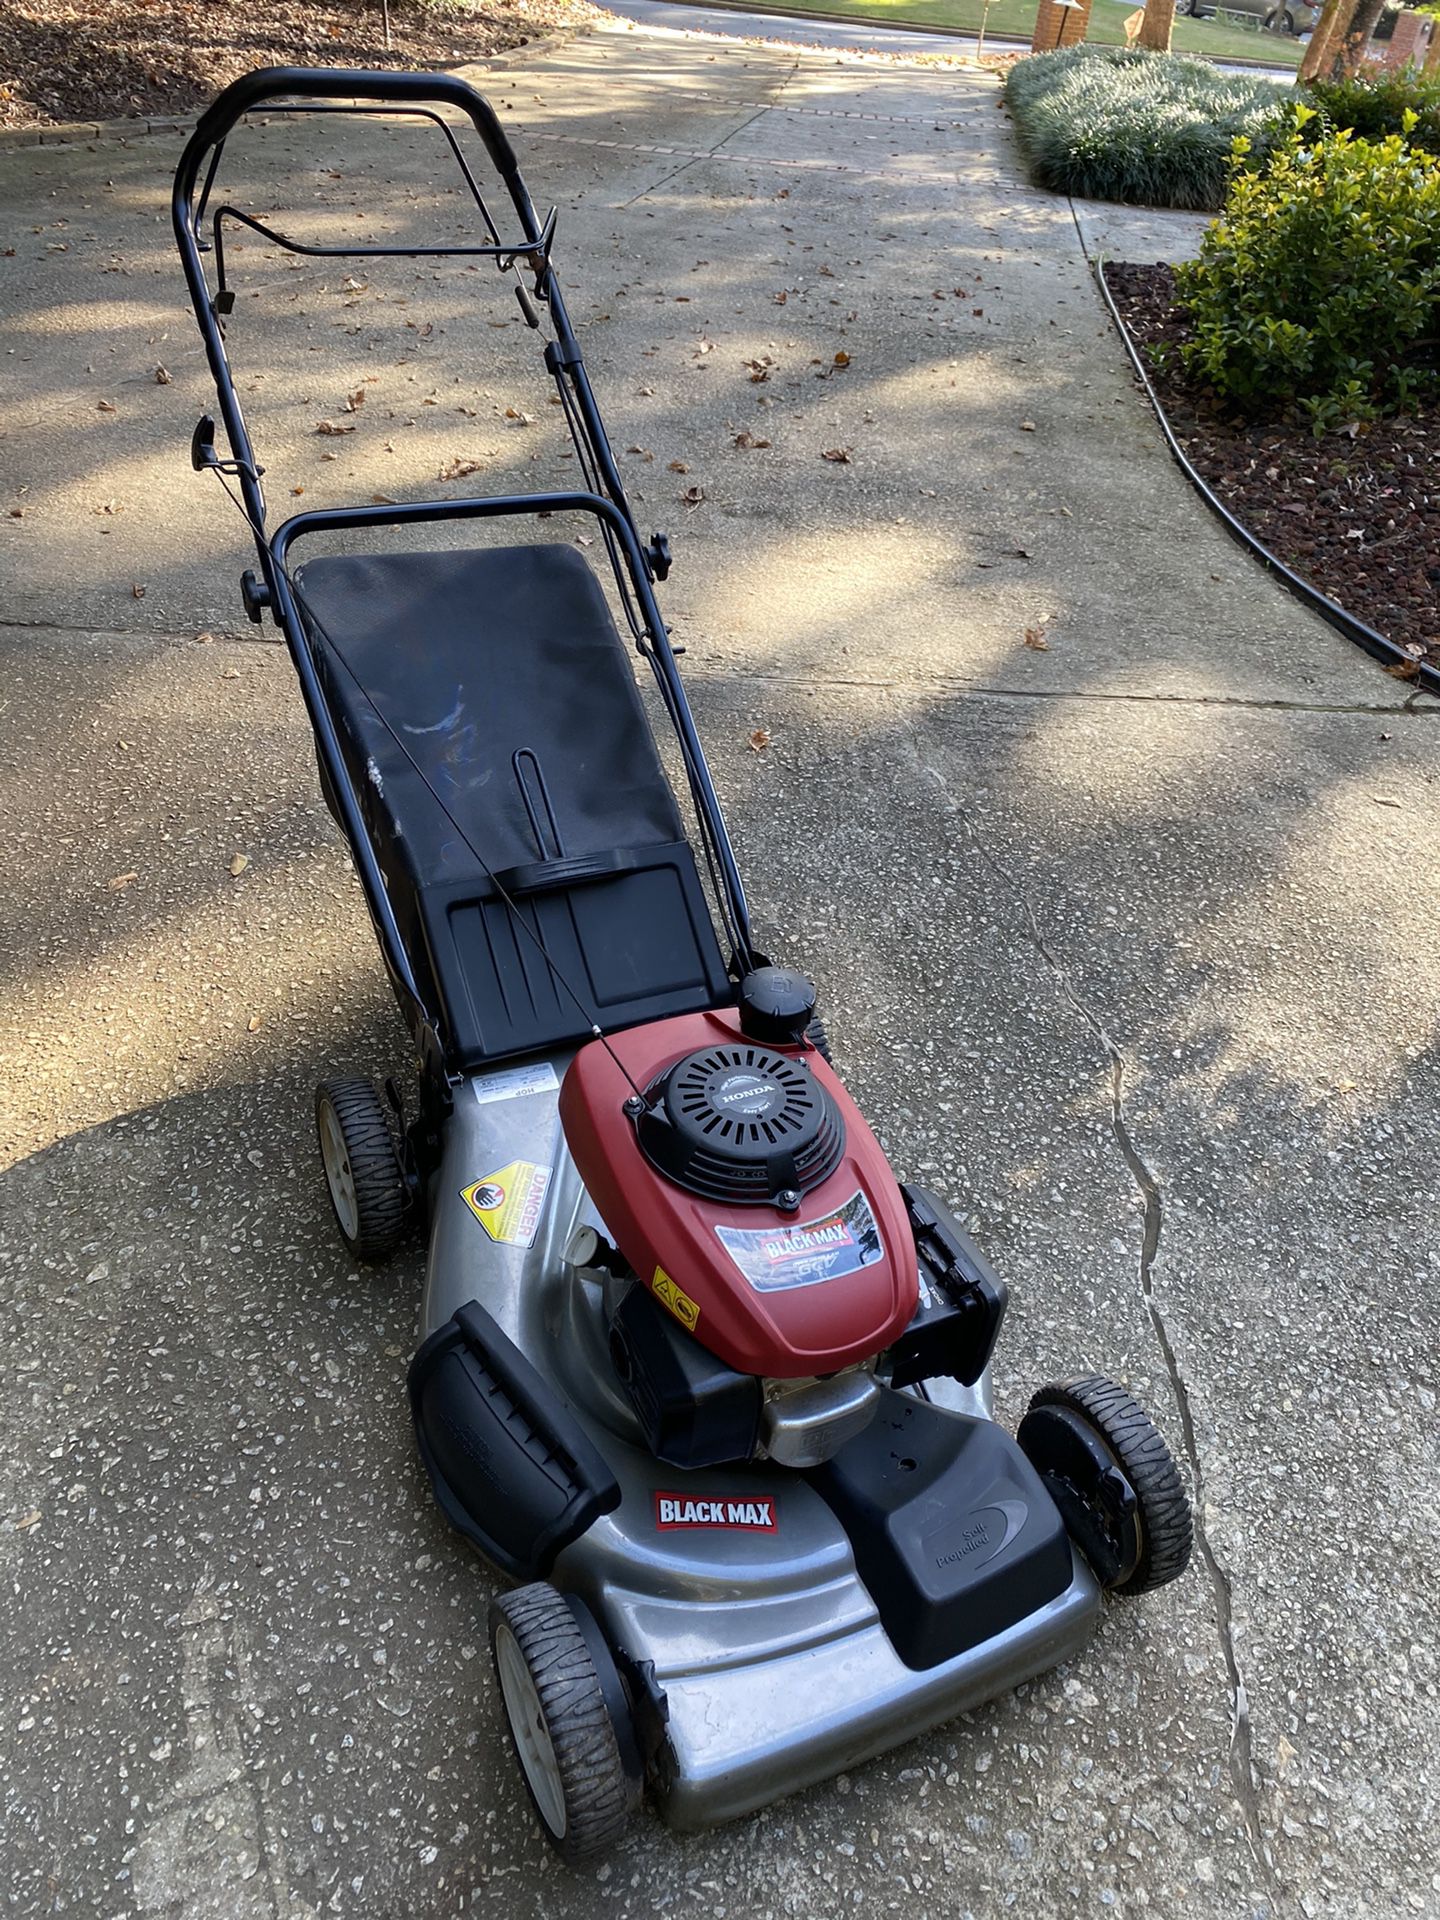 Blackmax Honda lawn mower with self propelled.